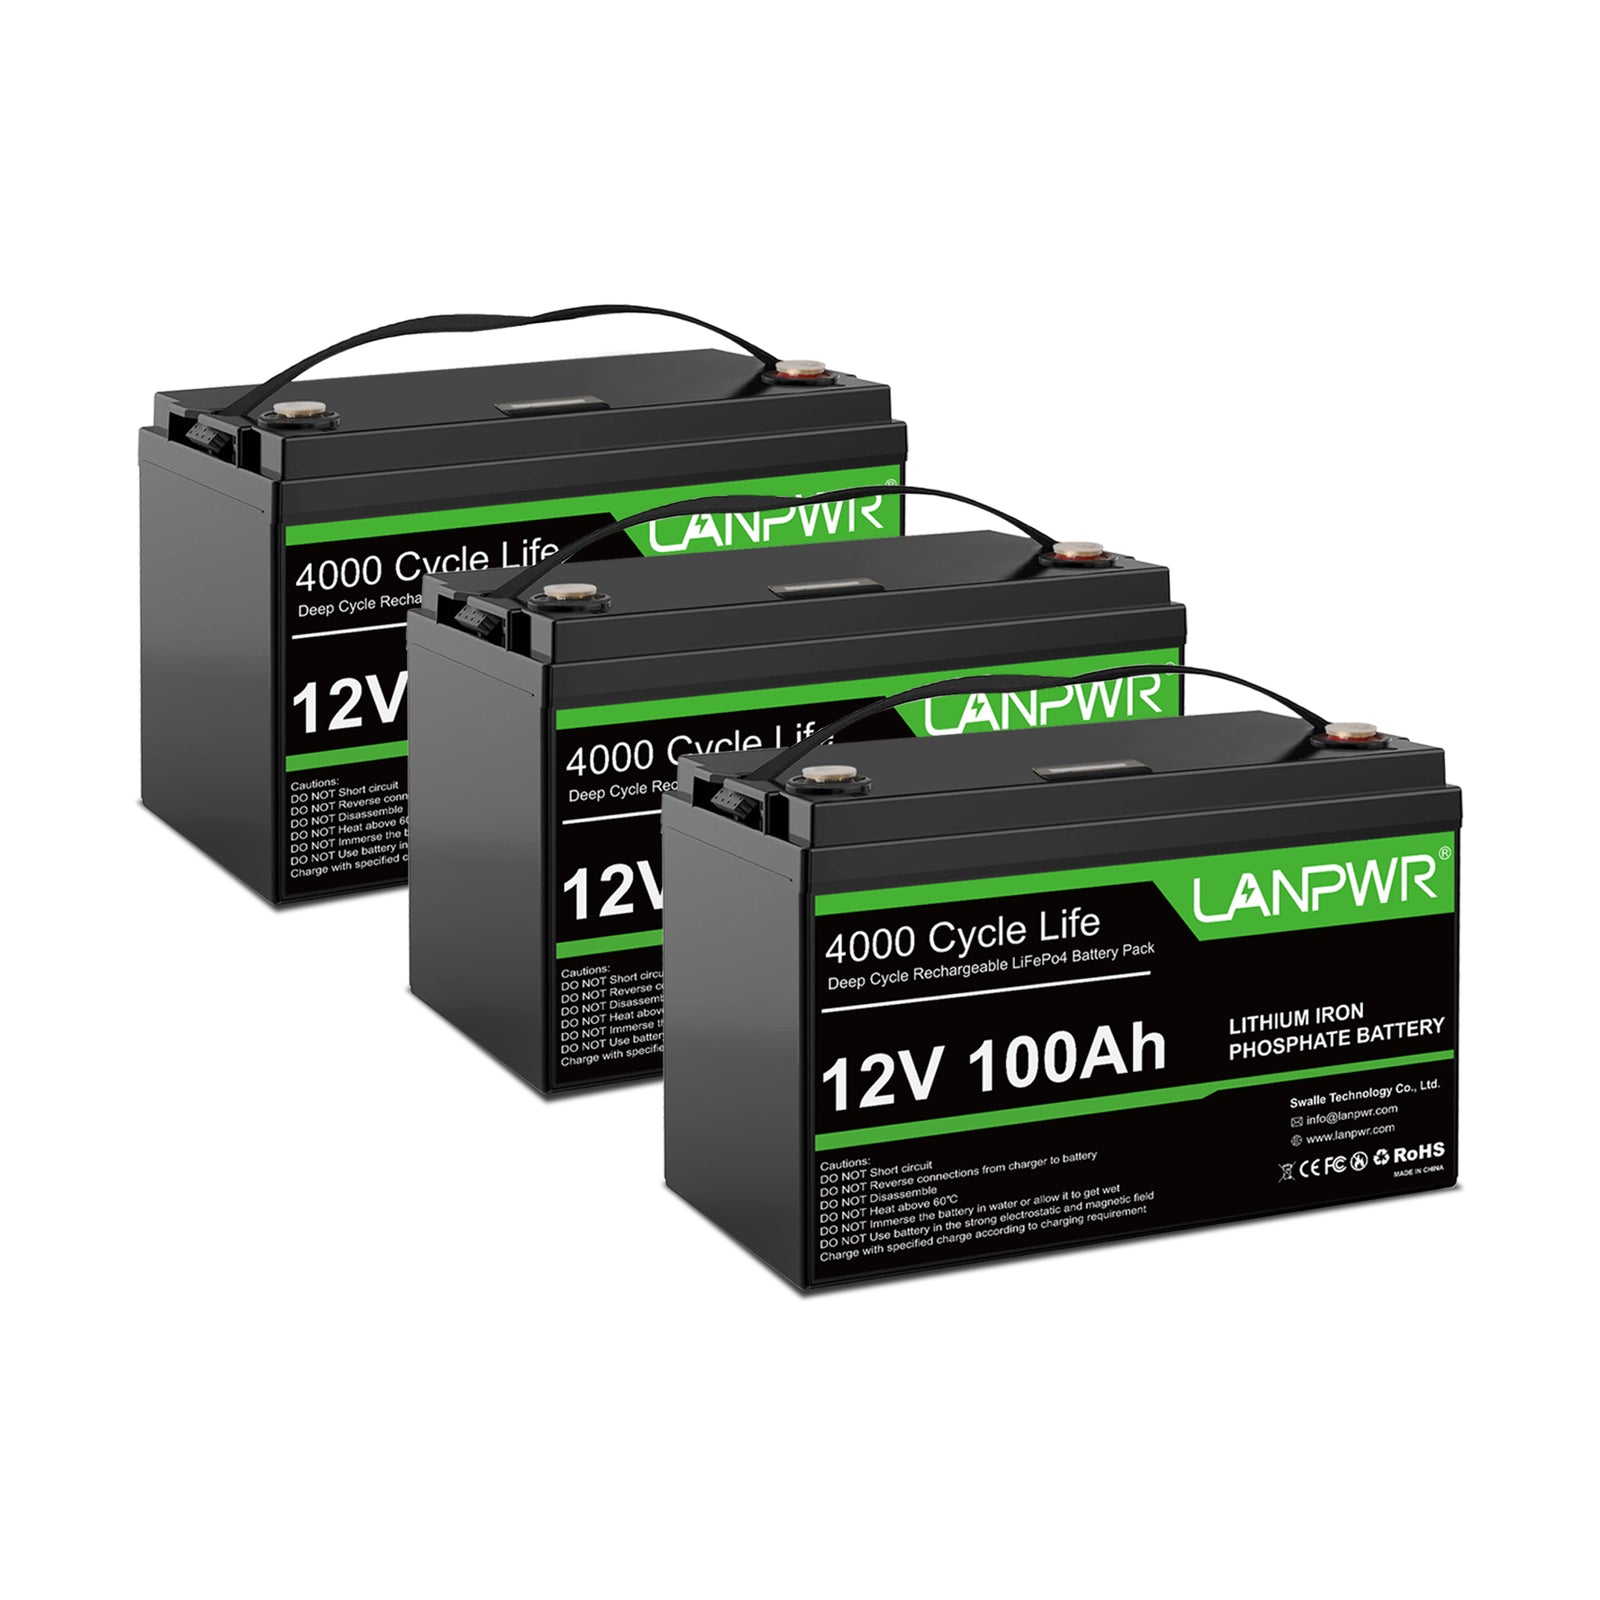 LANPWR 12V 100Ah LiFePO4 Battery, Built-In 100A BMS, 1280Wh Energy